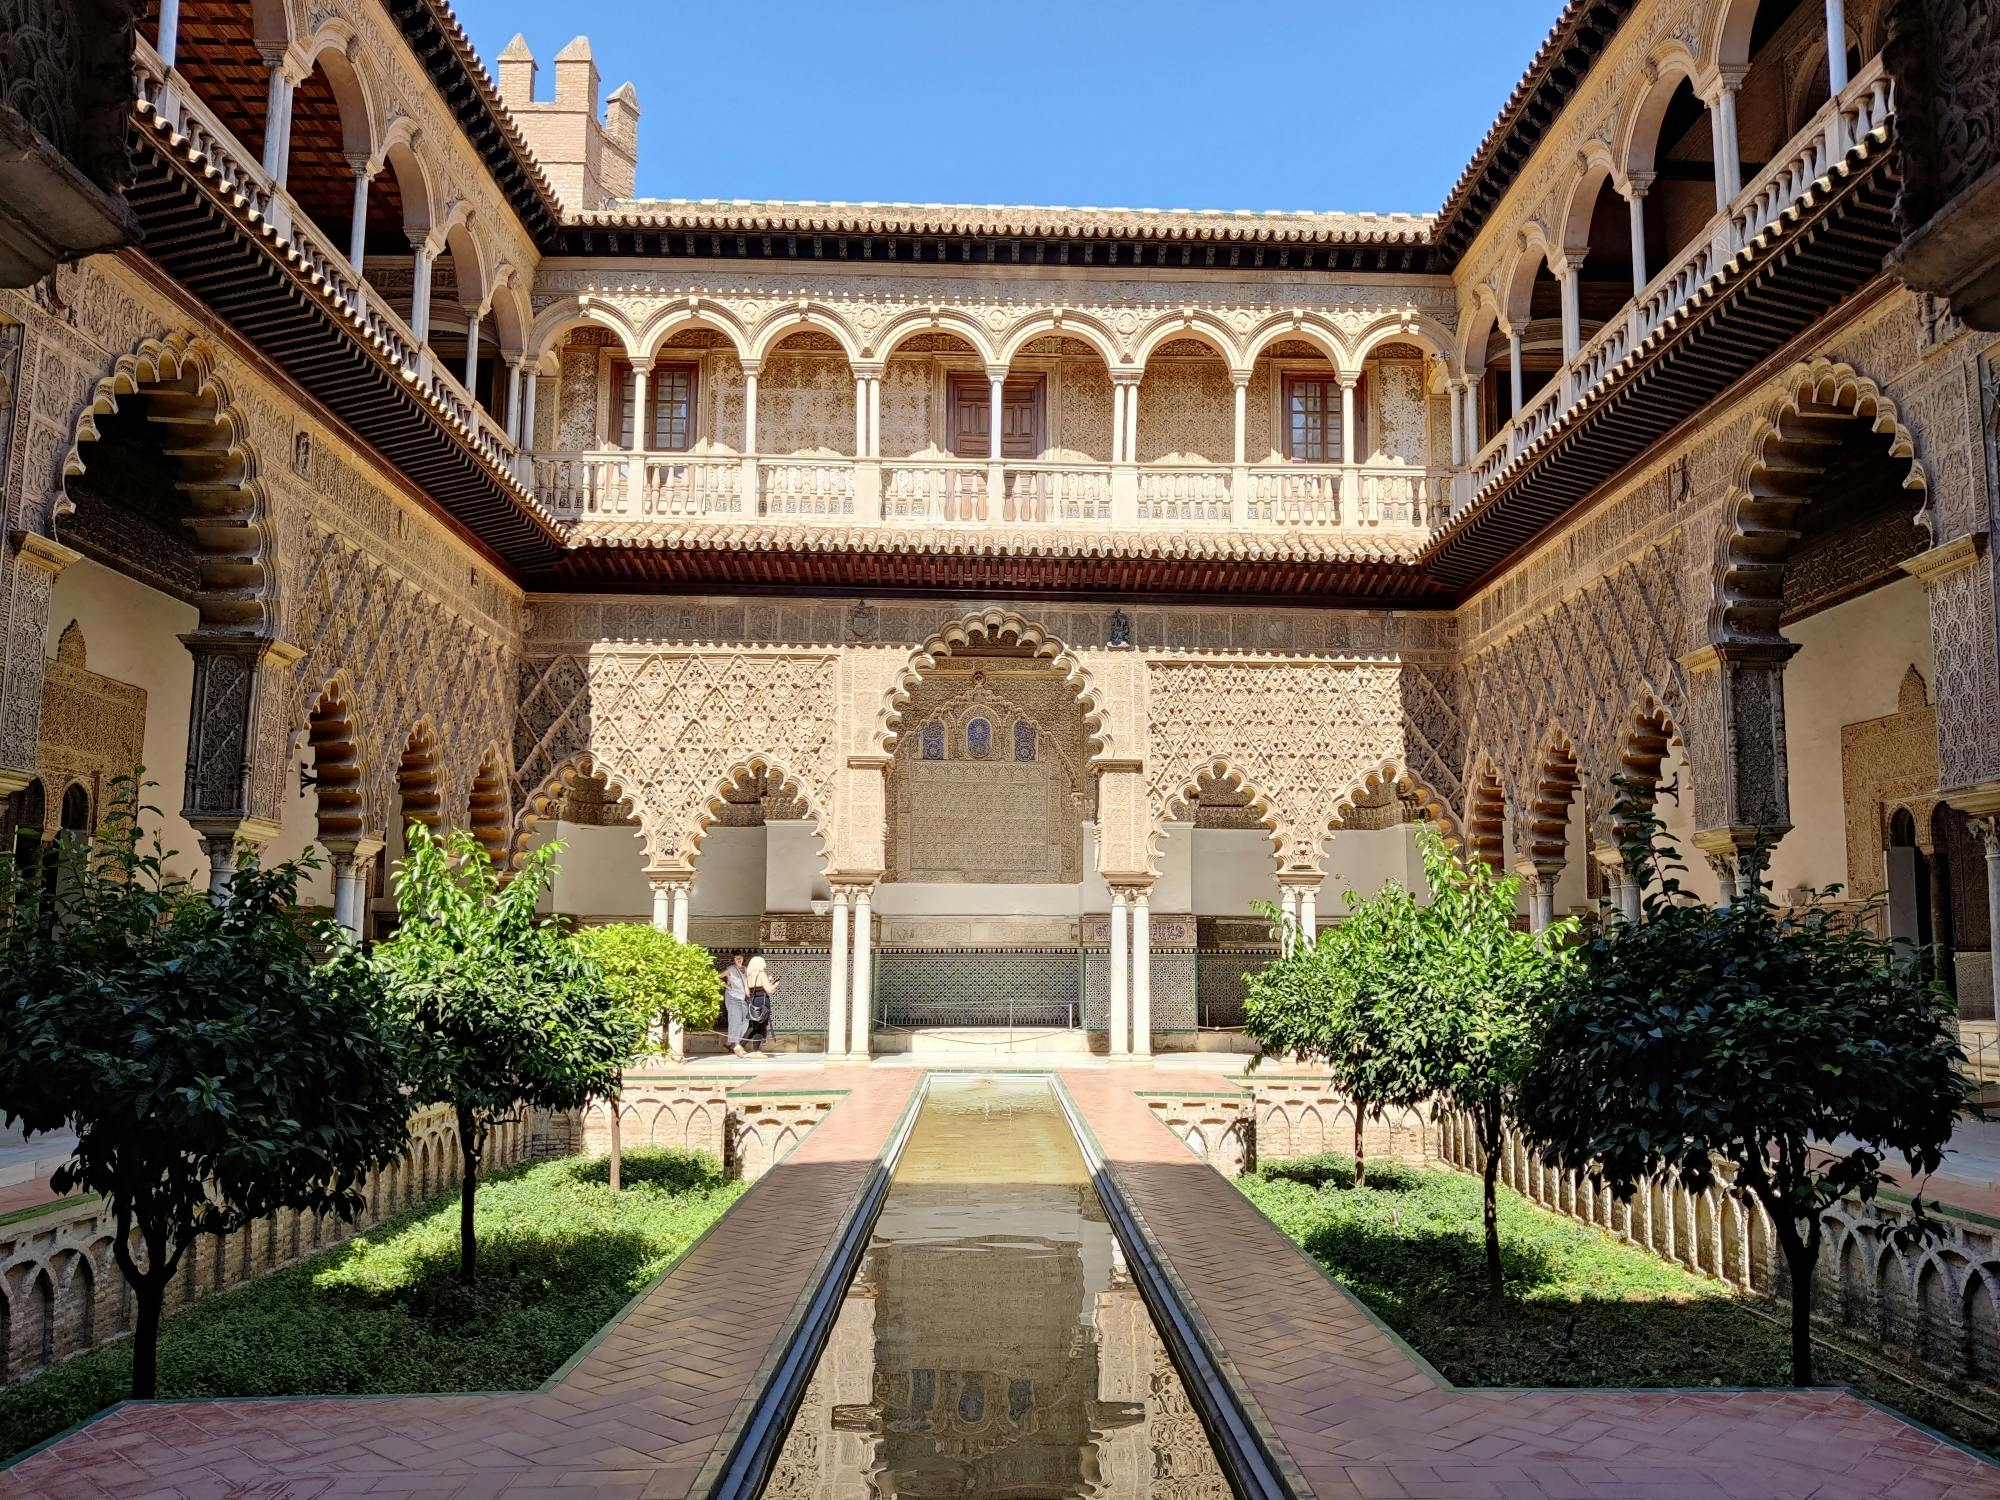 Real Alcázar de Sevilla: skip-the-line tickets and guided tour